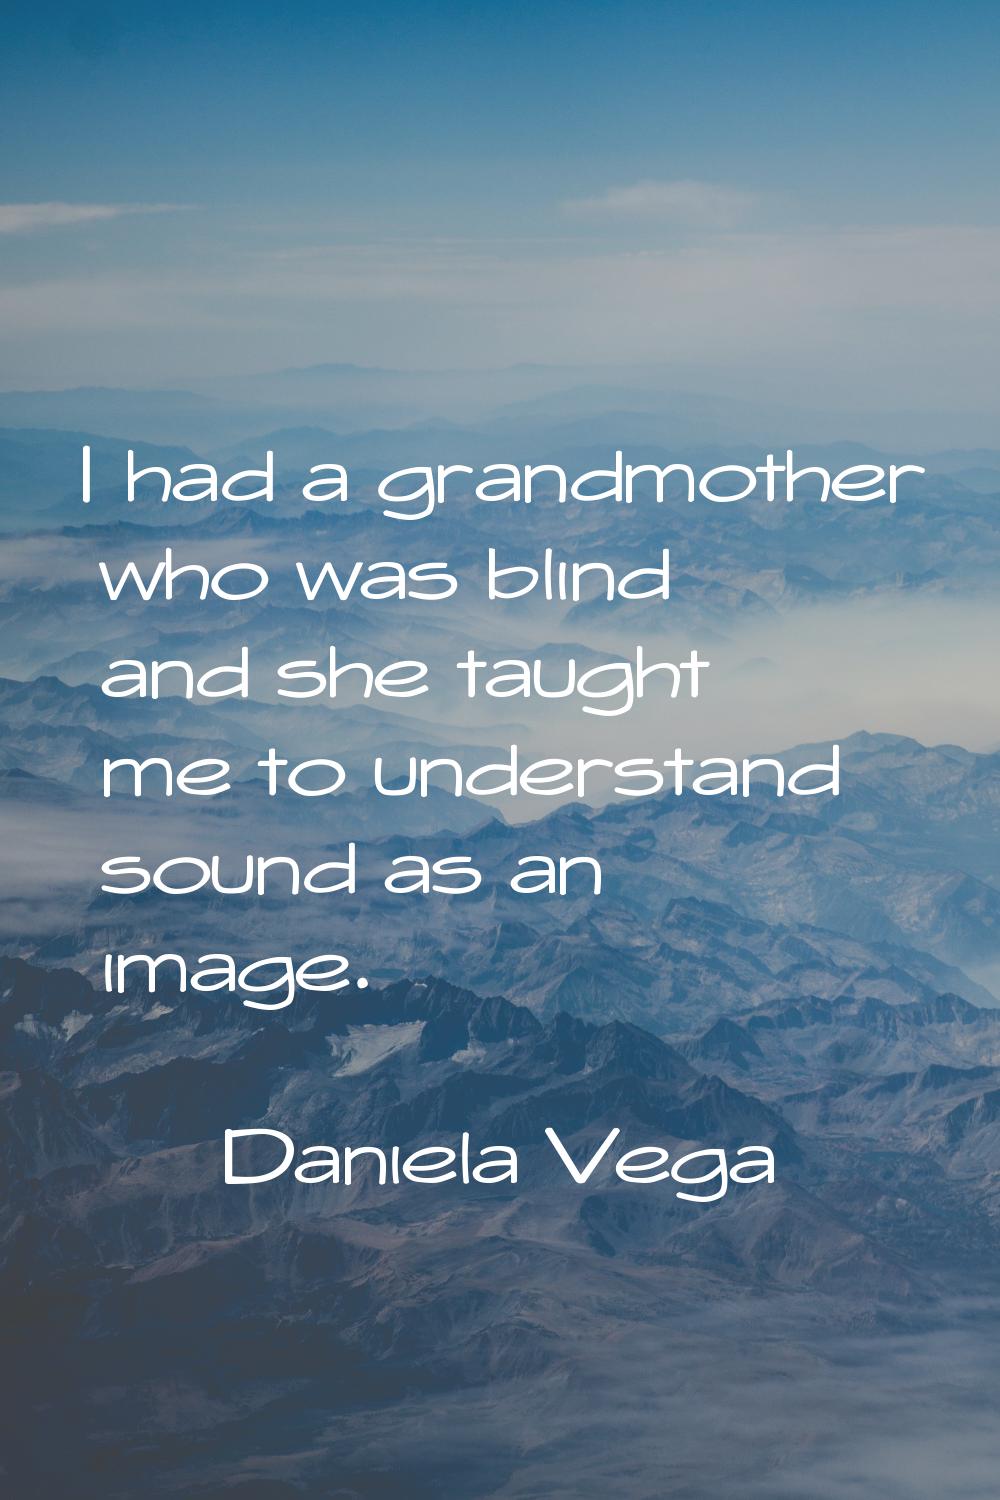 I had a grandmother who was blind and she taught me to understand sound as an image.